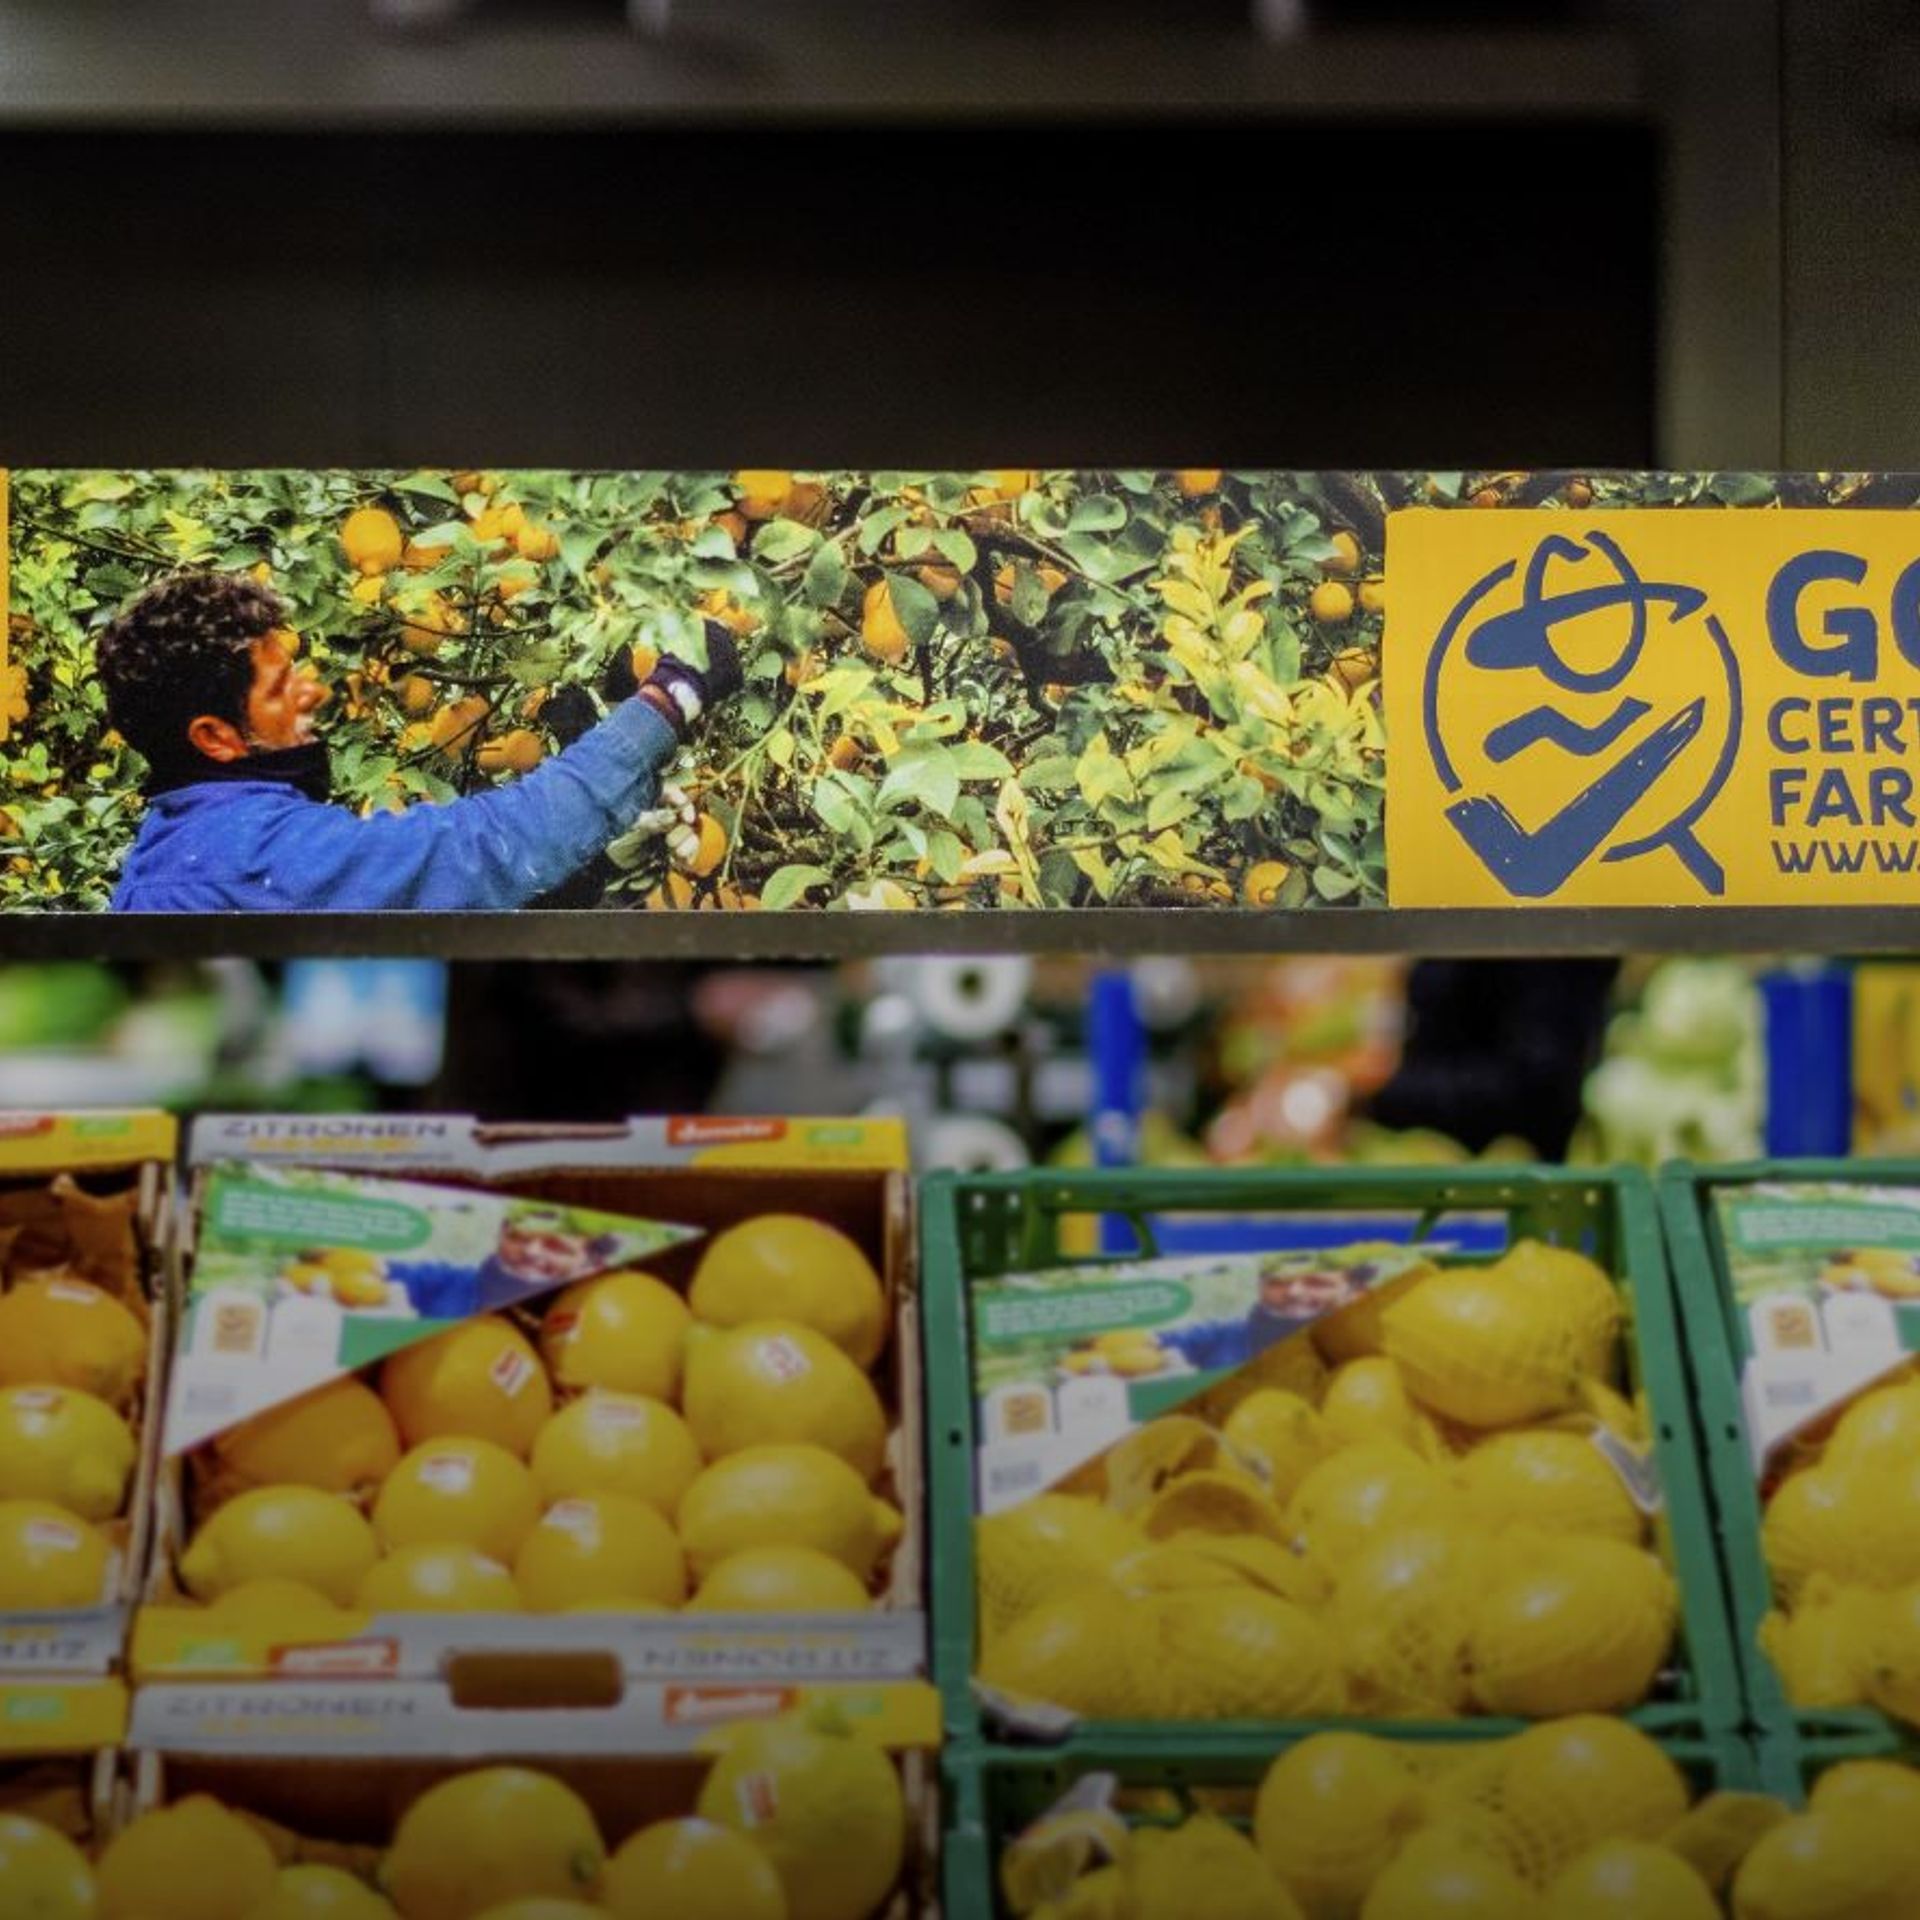 Image of fruit with the GGN label on a display stand in the retailer Globus in Germany